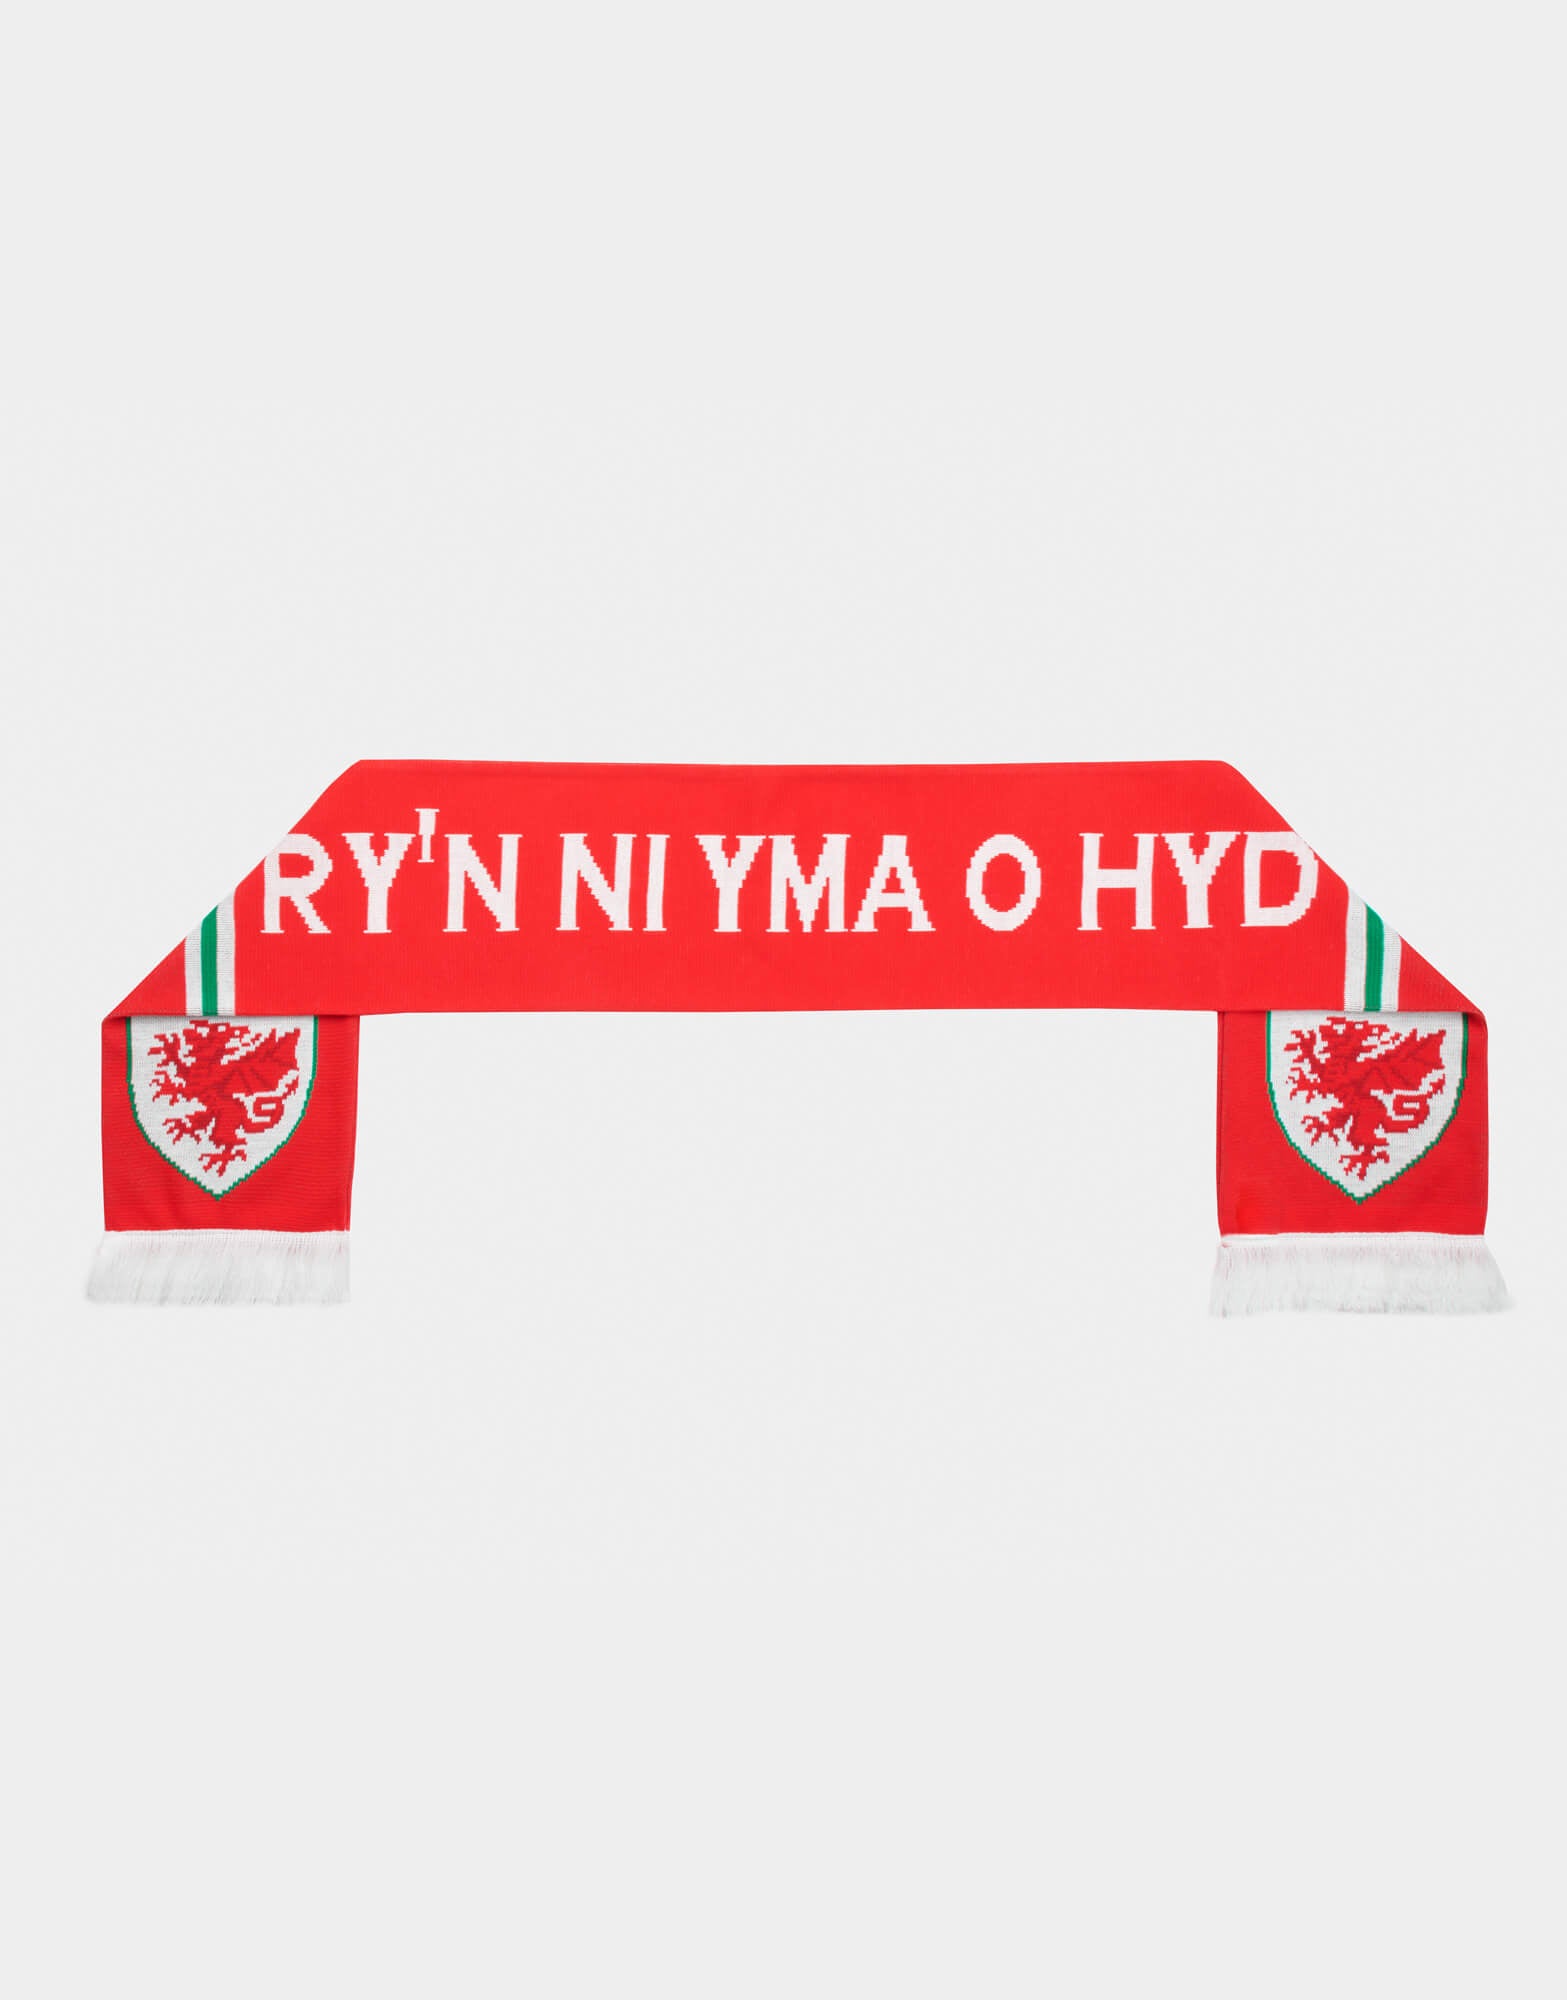 Official Team Wales Jacquard Scarf - The World Football Store